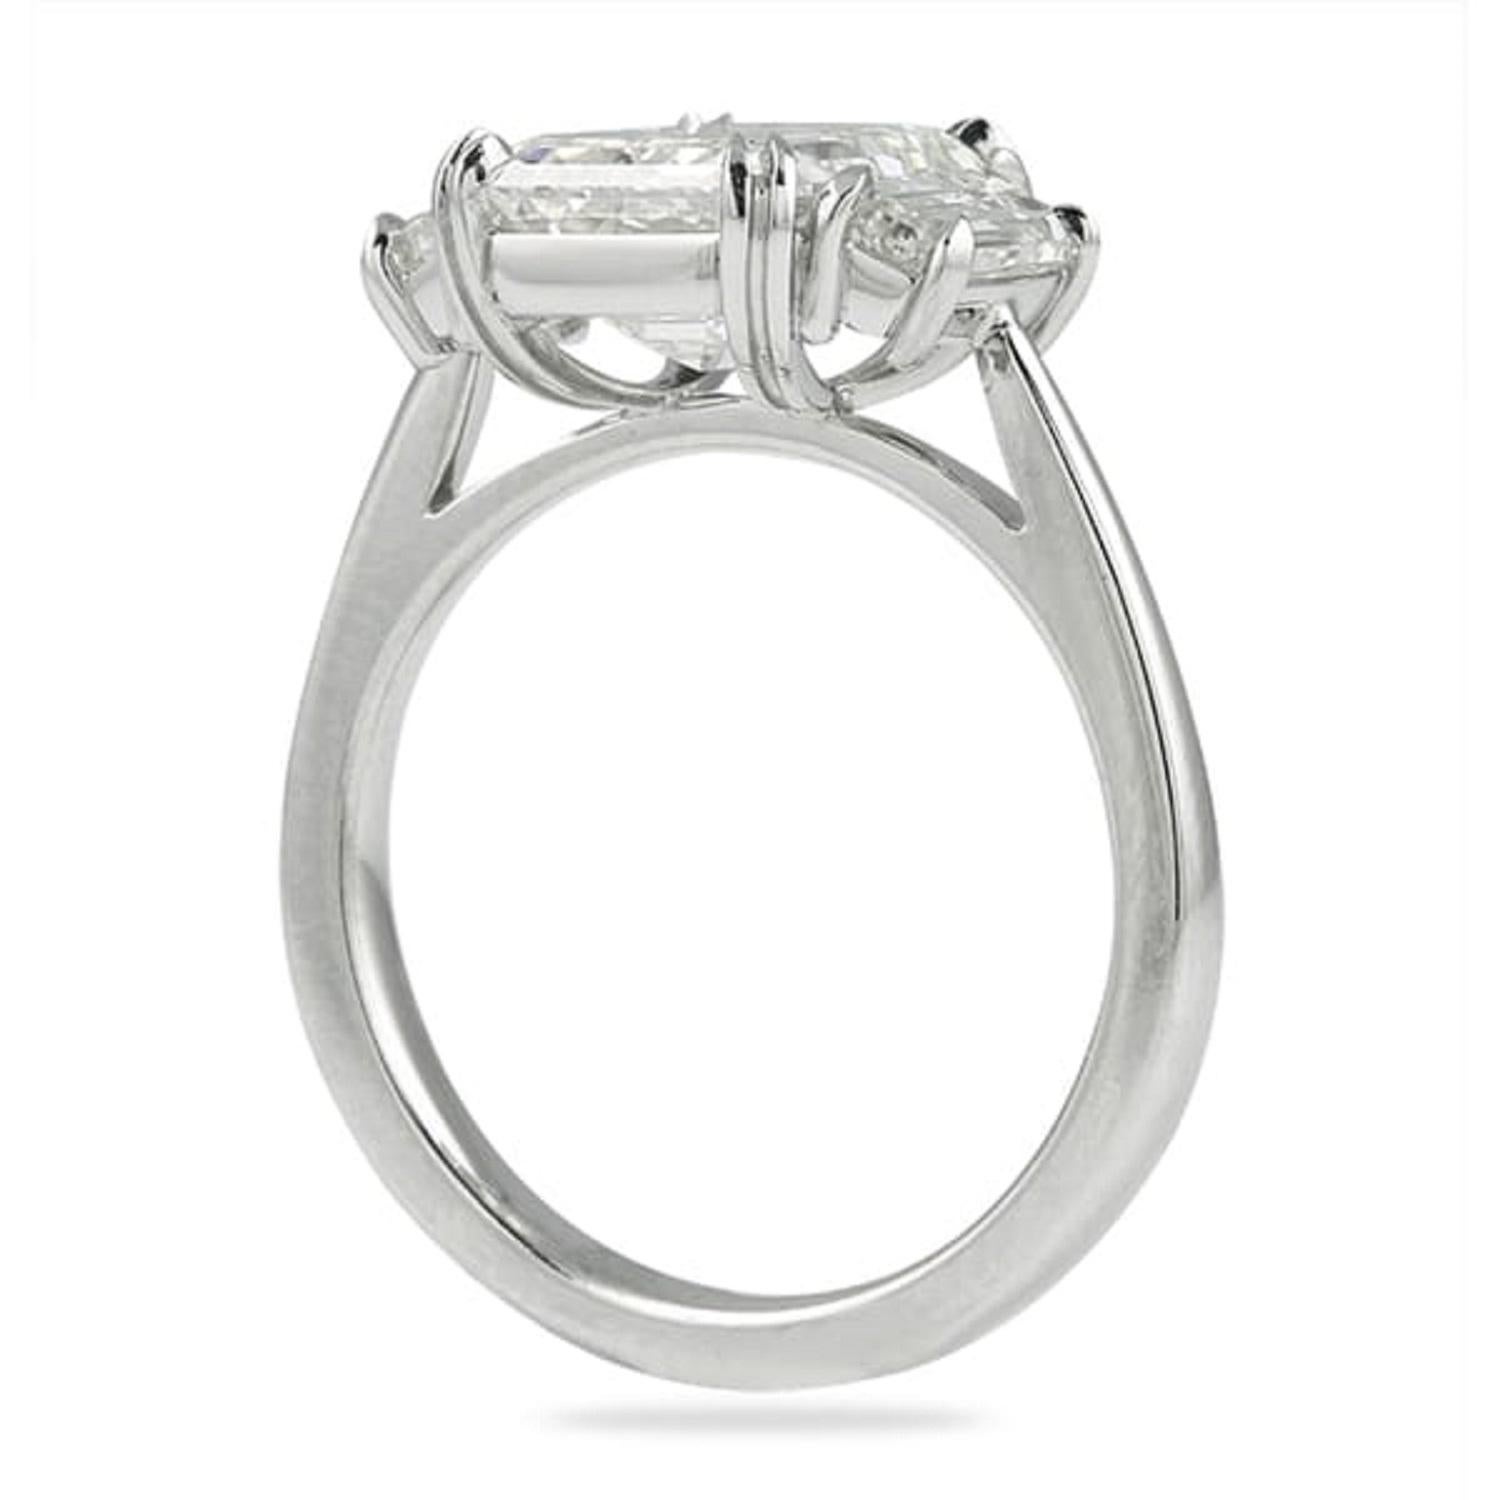 This lovely and significant ring centers on a 4 carat emerald-cut diamond with D rare white color and flawless clarity. The diamond is flanked by two trapezoid-cut diamonds totaling mounted in platinum. 

Fawless diamonds or loupe clean are very